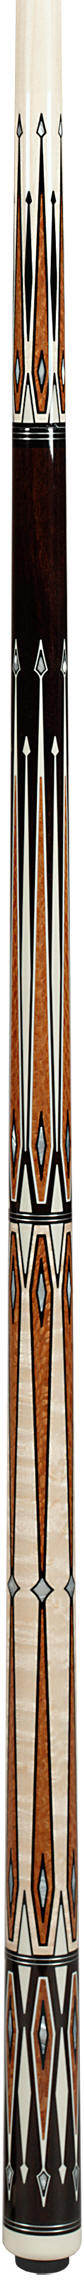 Pechauer Camelot Series II Pool Cue - Manchester